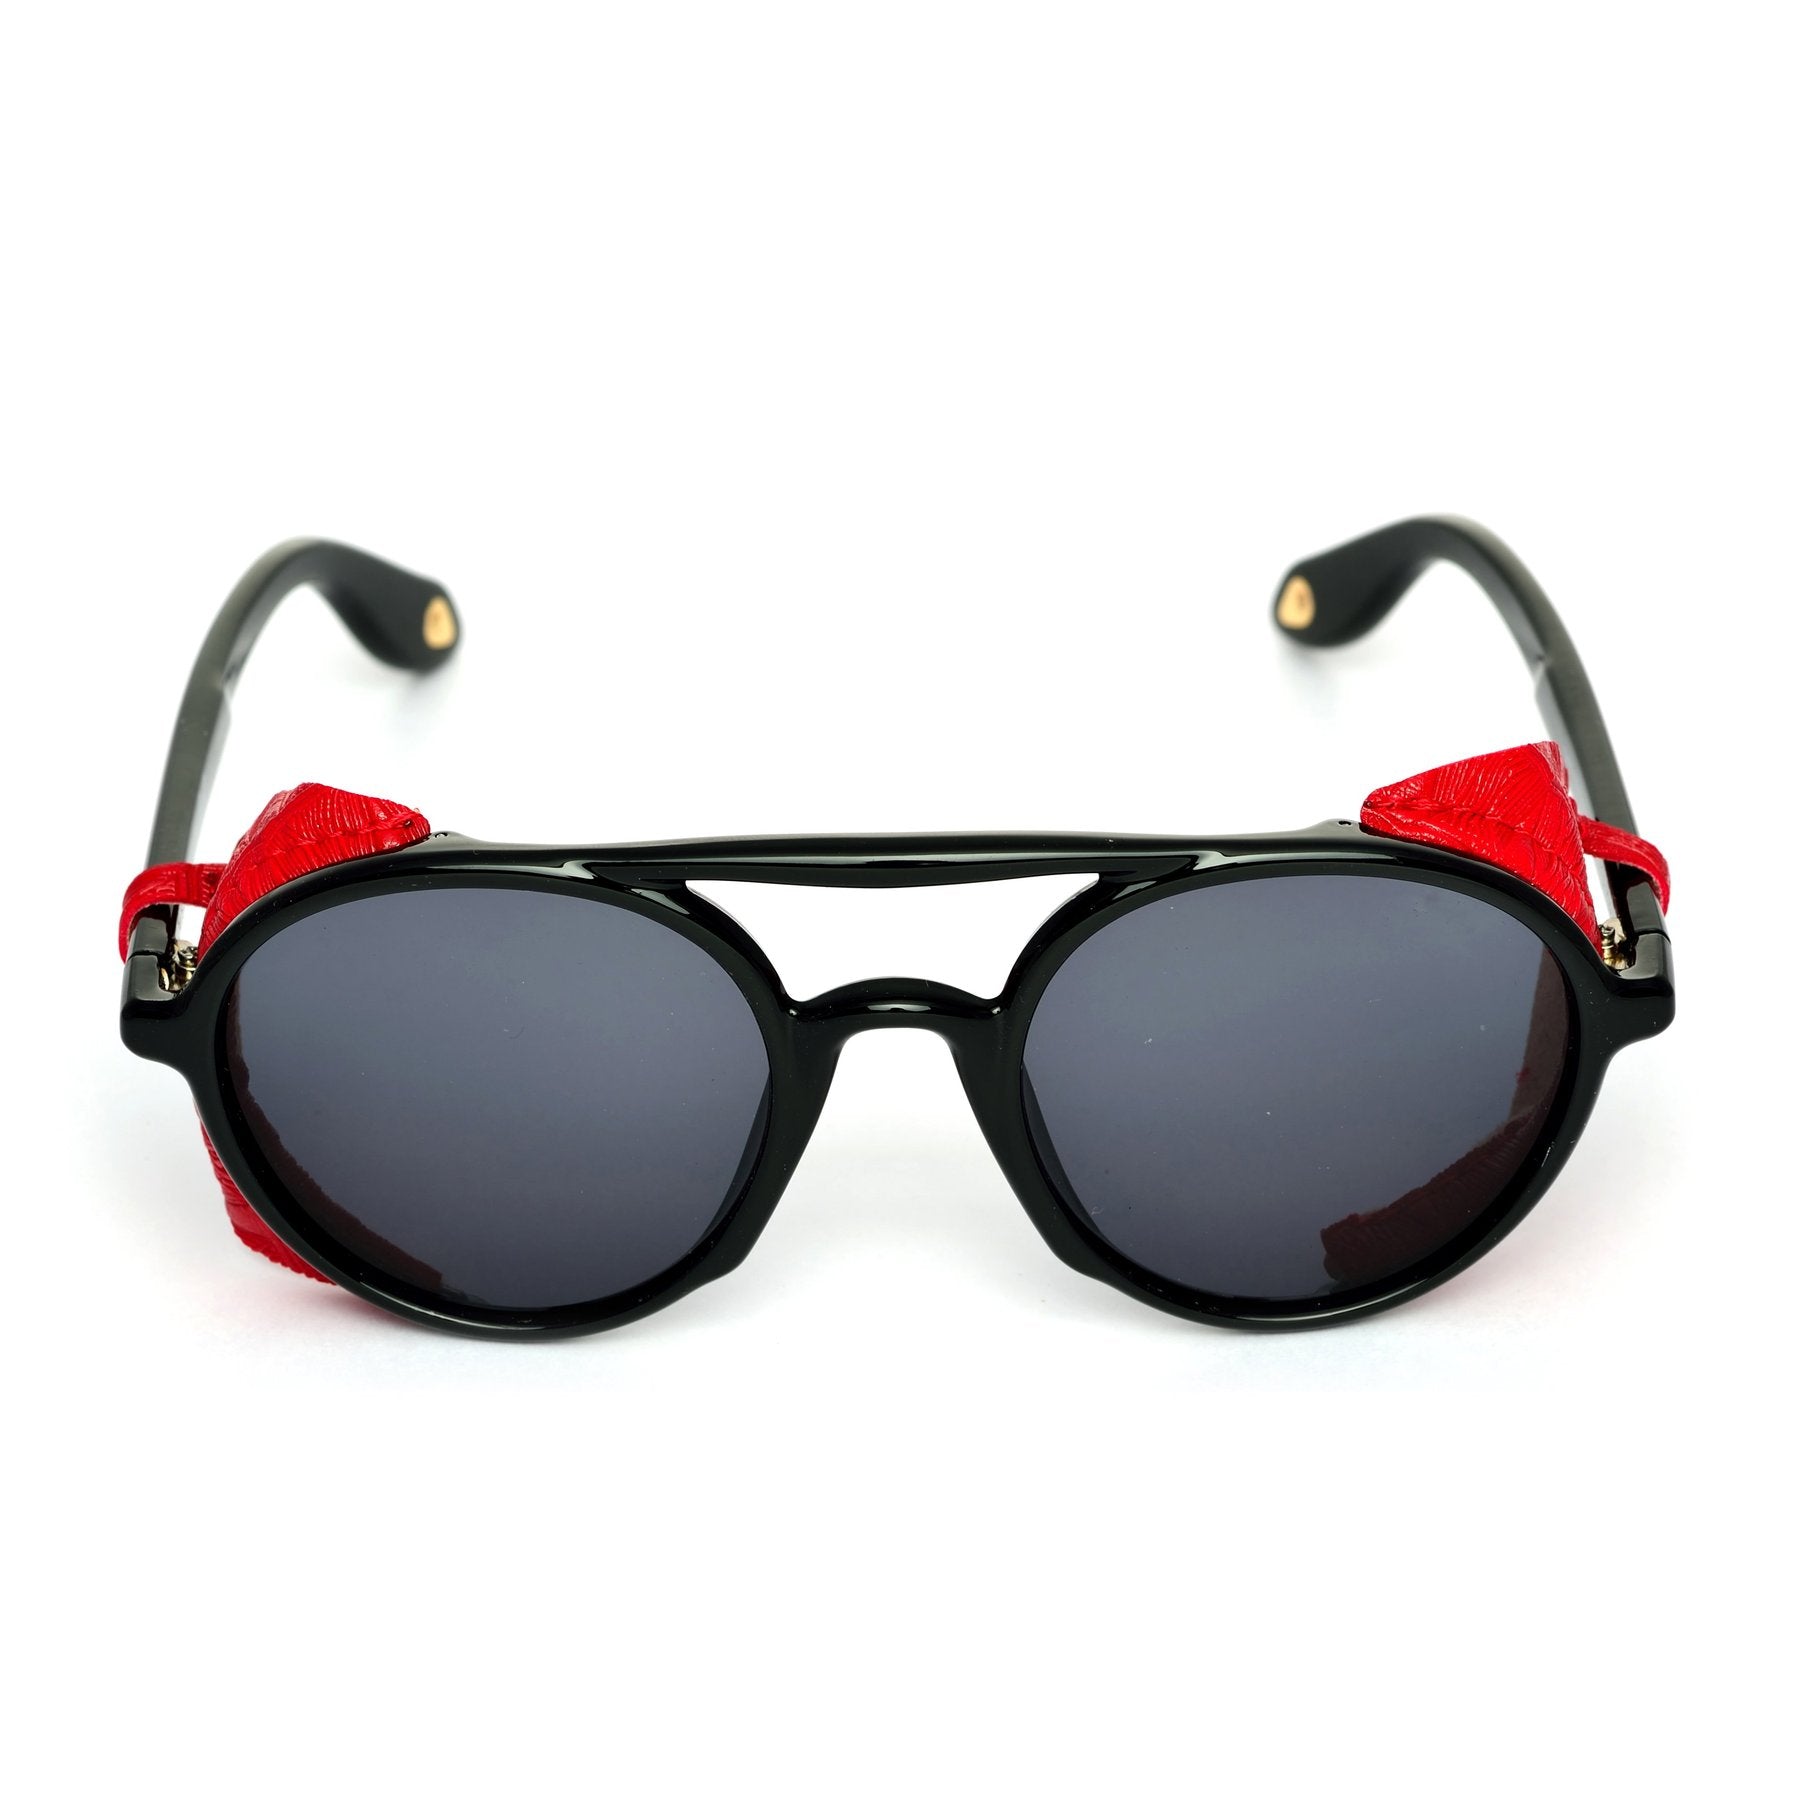 Round Black And Black Sunglasses For Men And Women-FunkyTradition